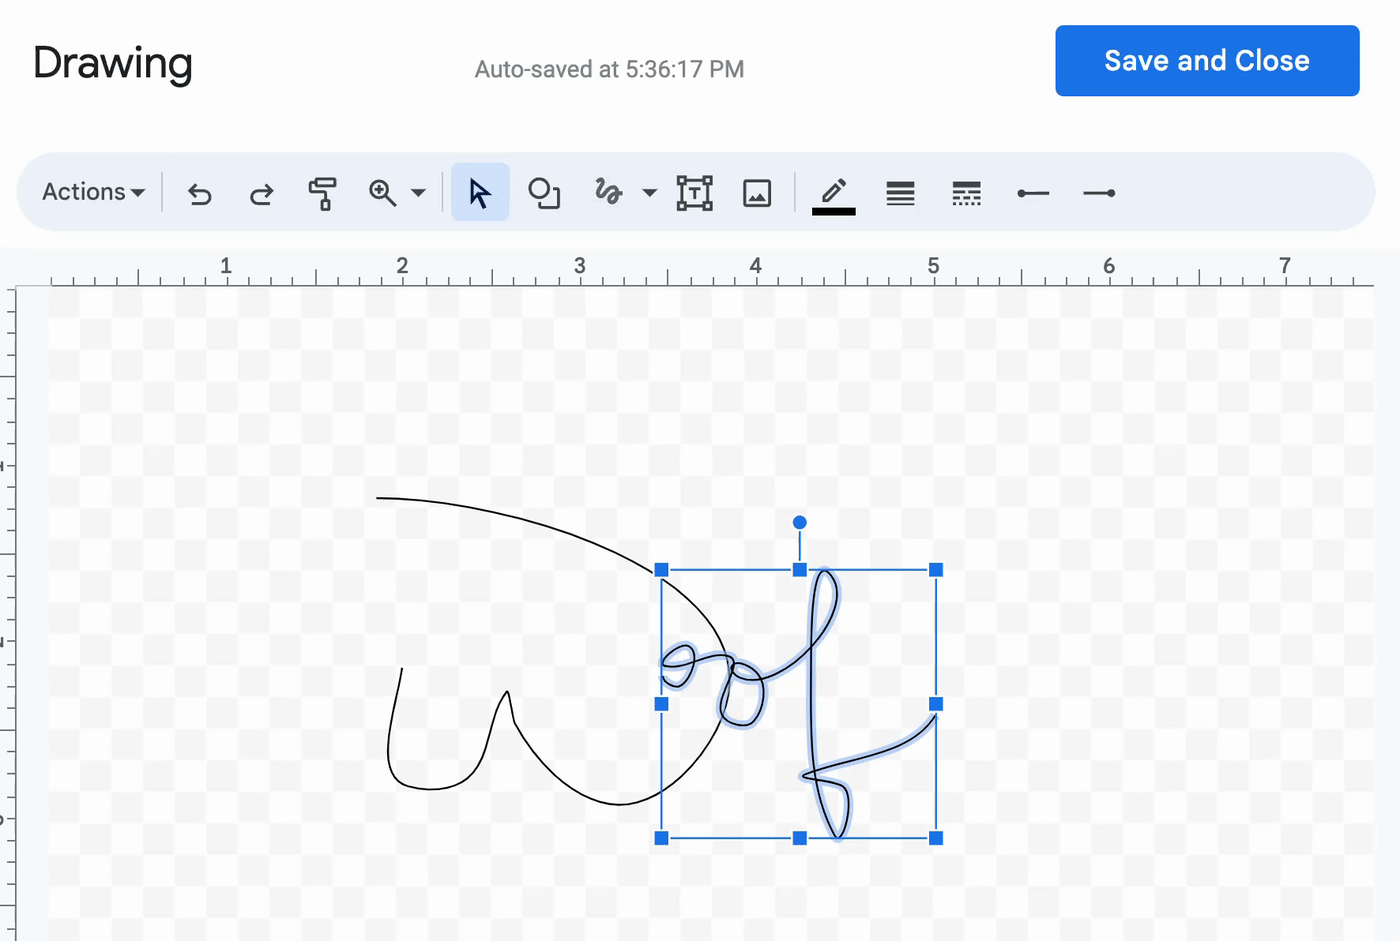 Demo of a signature in Google Docs being resized.